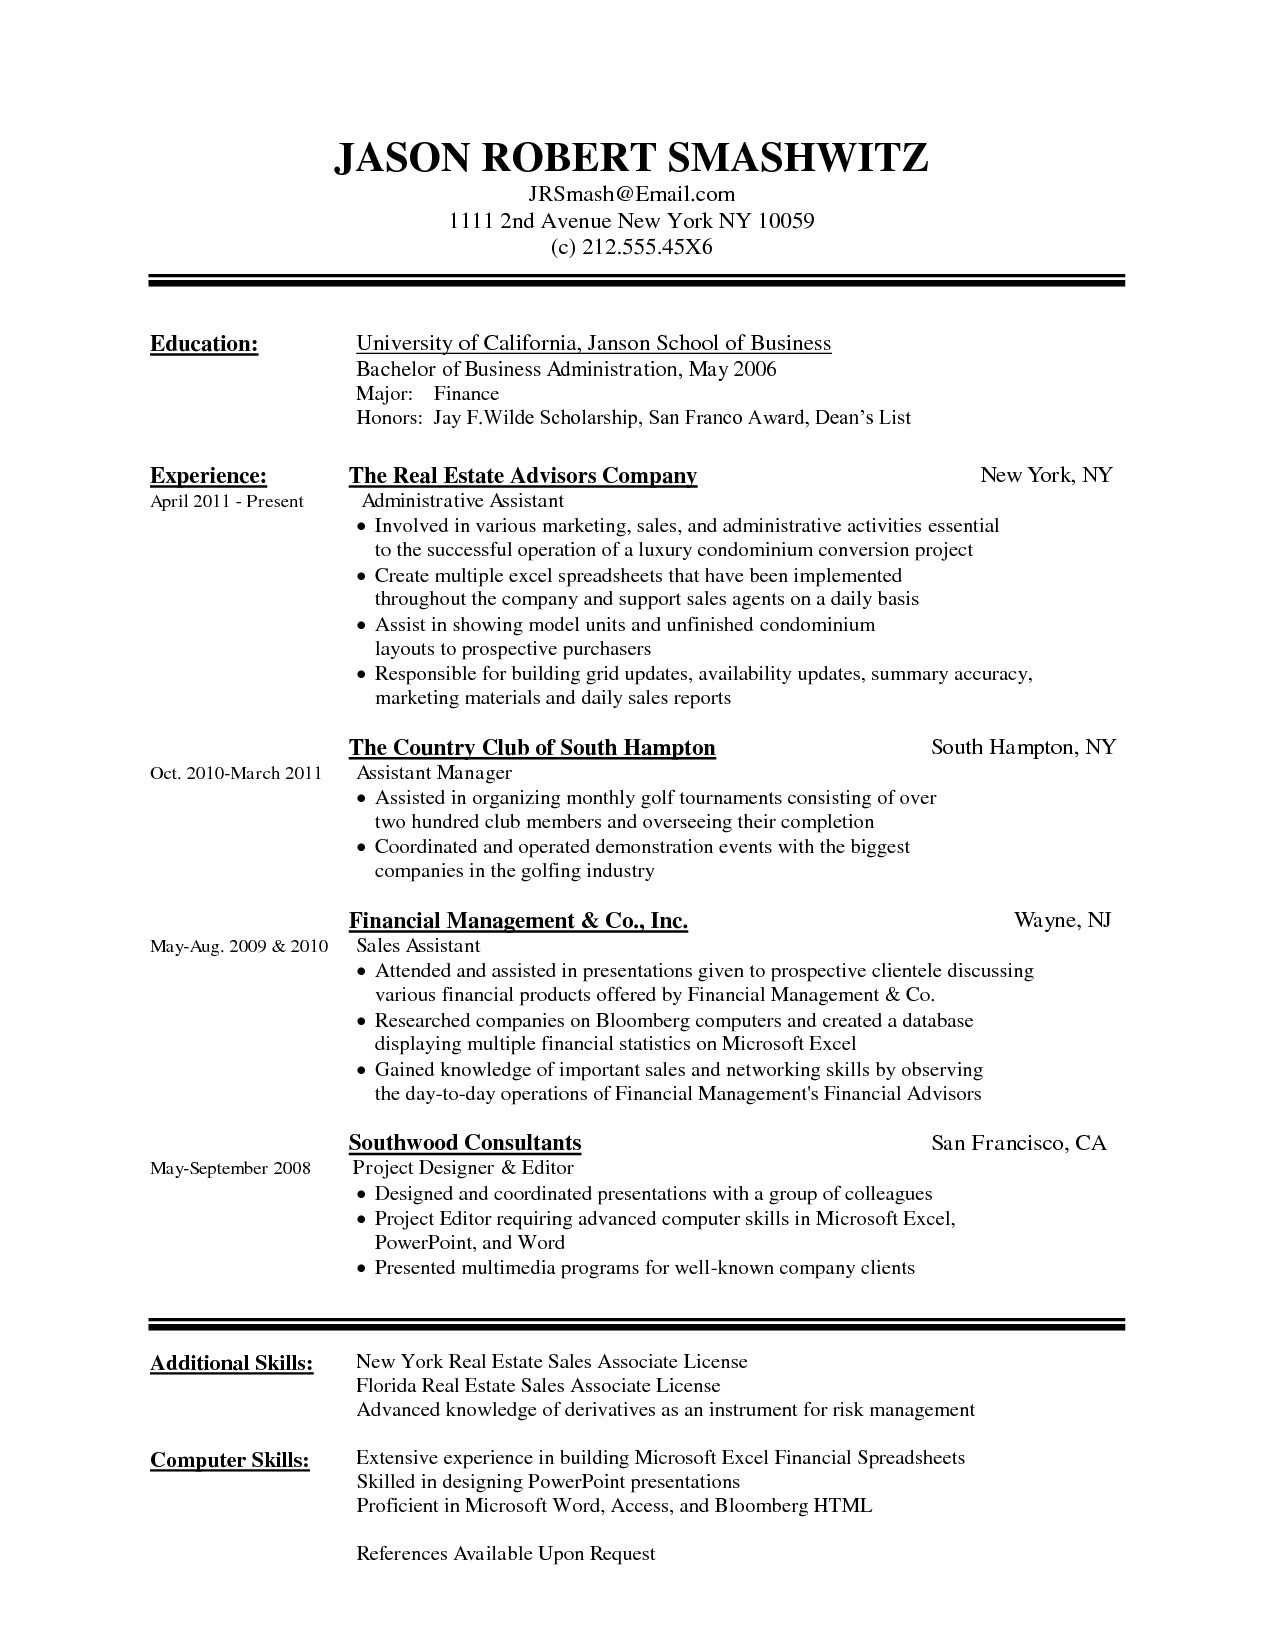 Awesome Resume Templates For Word 2010 – Superkepo Throughout Resume Templates Microsoft Word 2010